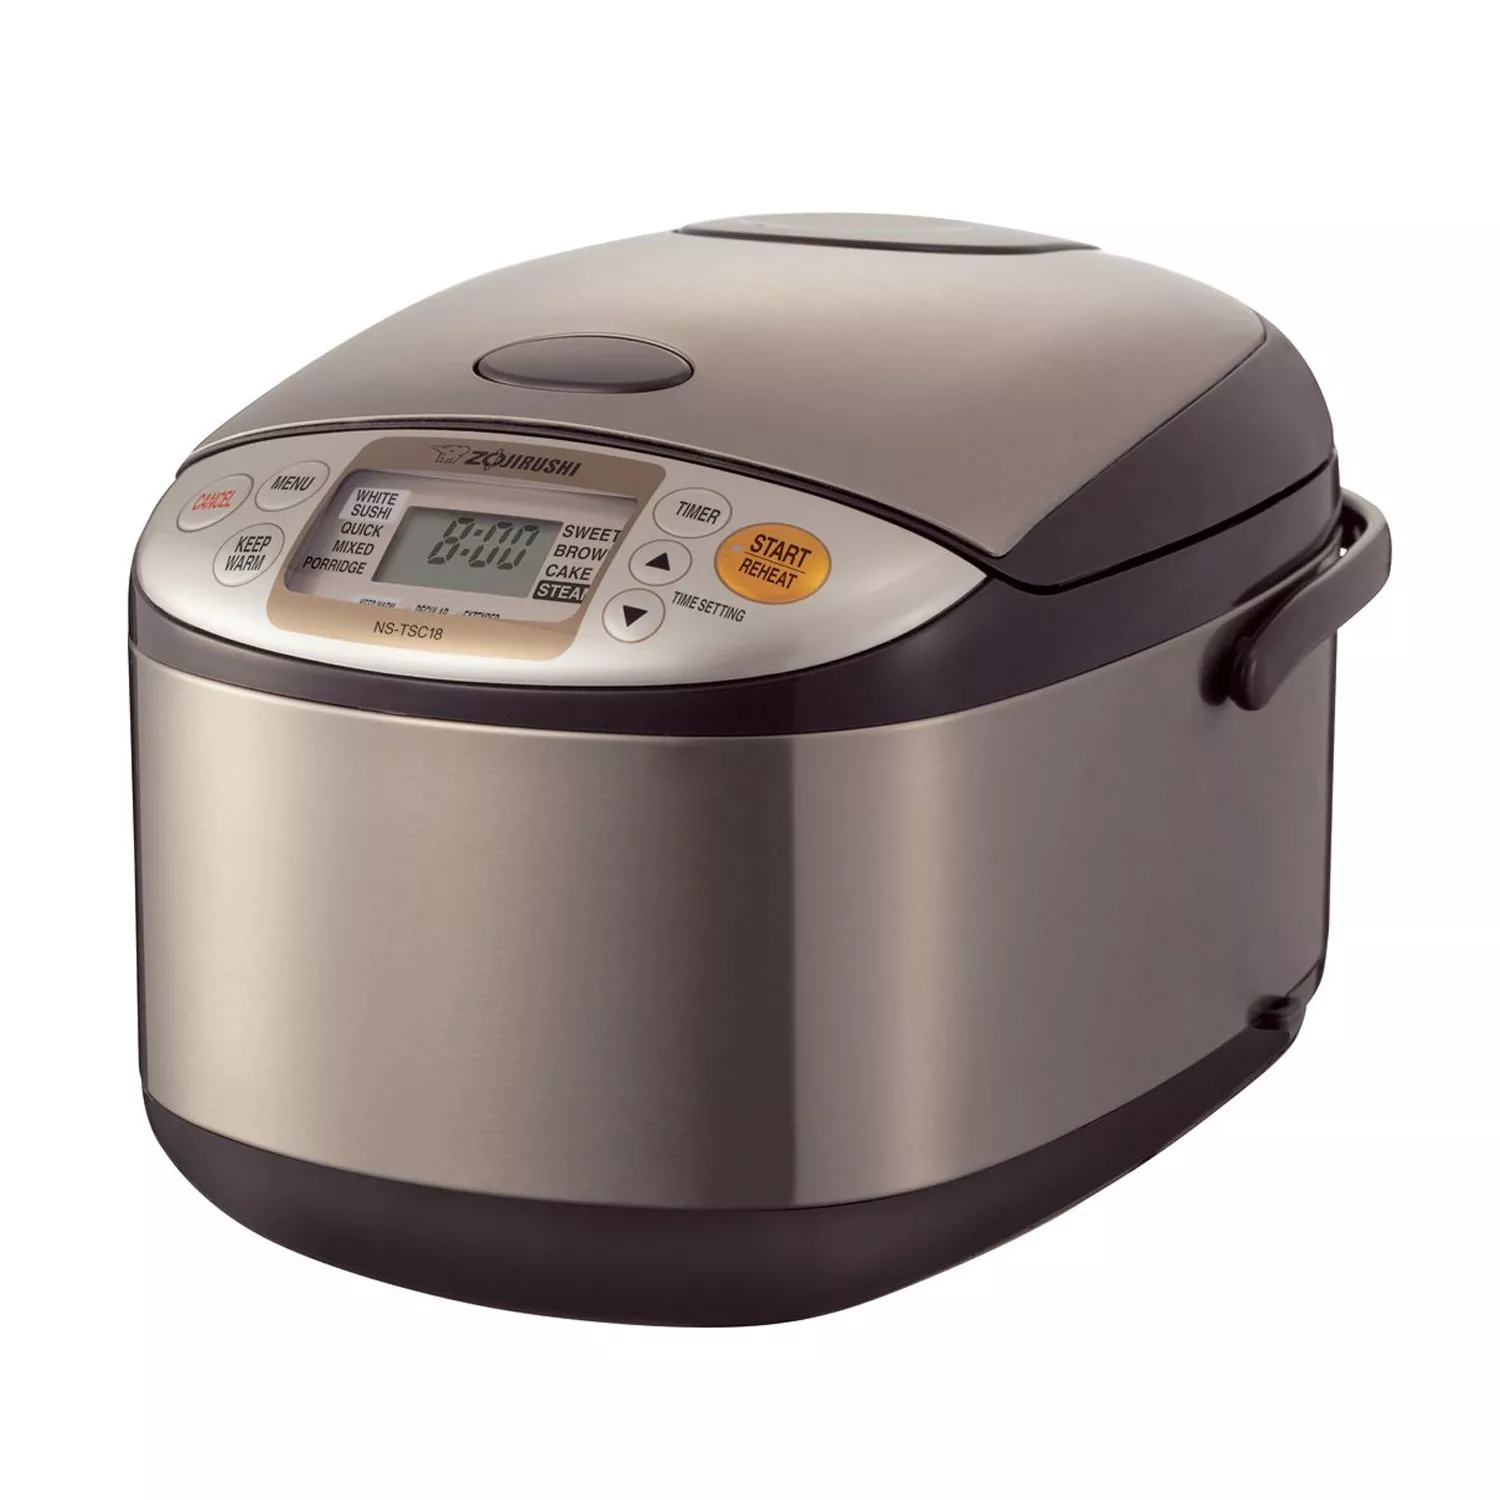 Sur La Table Rice Cooker with Induction Technology